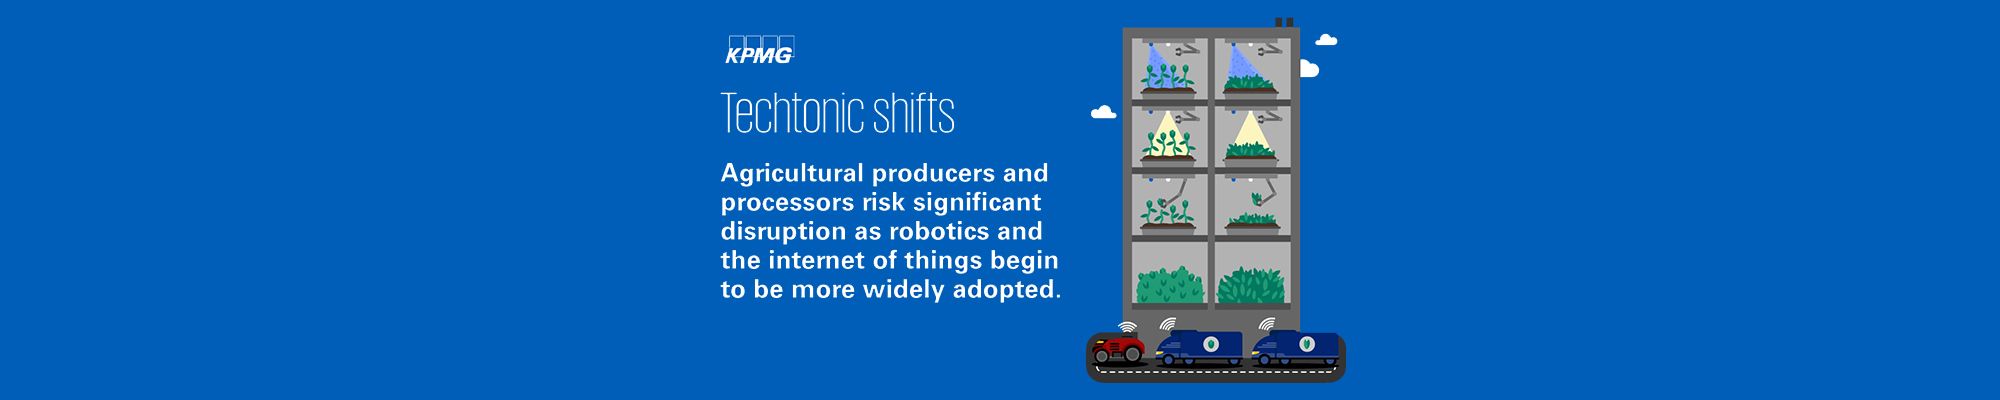 Image of vertical farm with text "Agricultural producers and processors risk significant disruption as robotics and the internet of things begin to be more widely adopted"